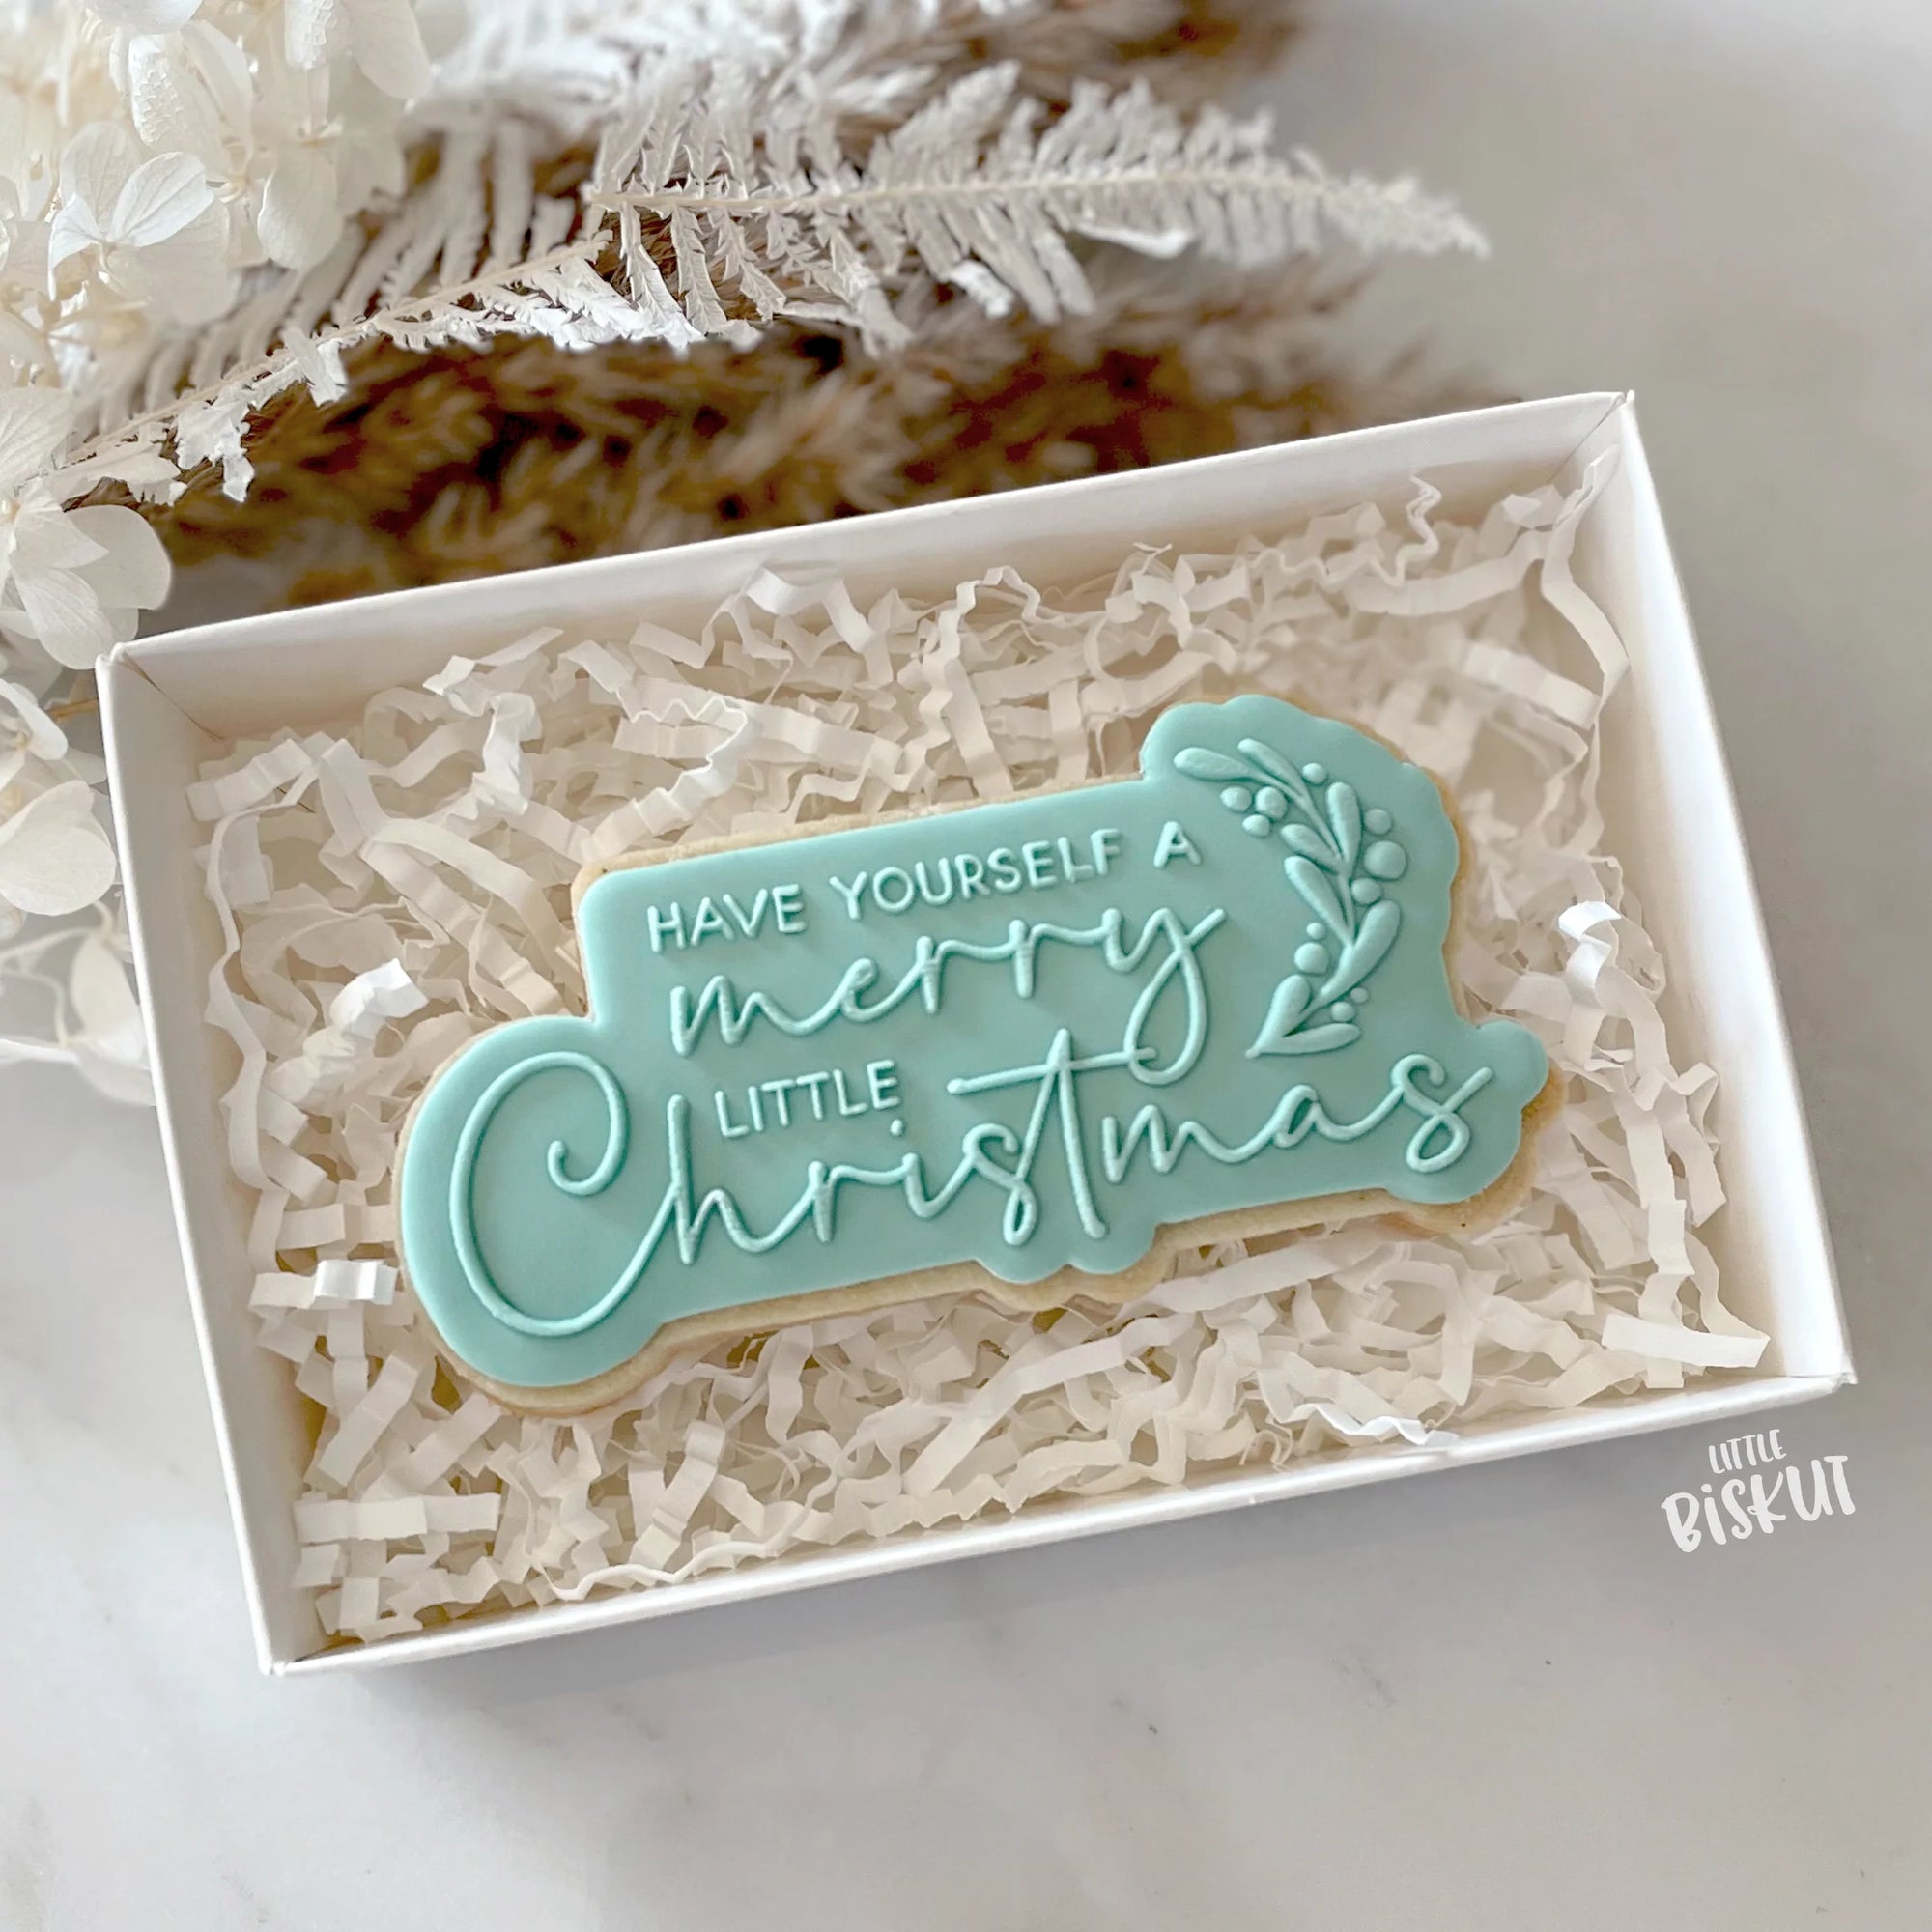 HAVE YOURSELF A MERRY LITTLE CHRISTMAS EMBOSSER + CUTTER SET by Little Biskut